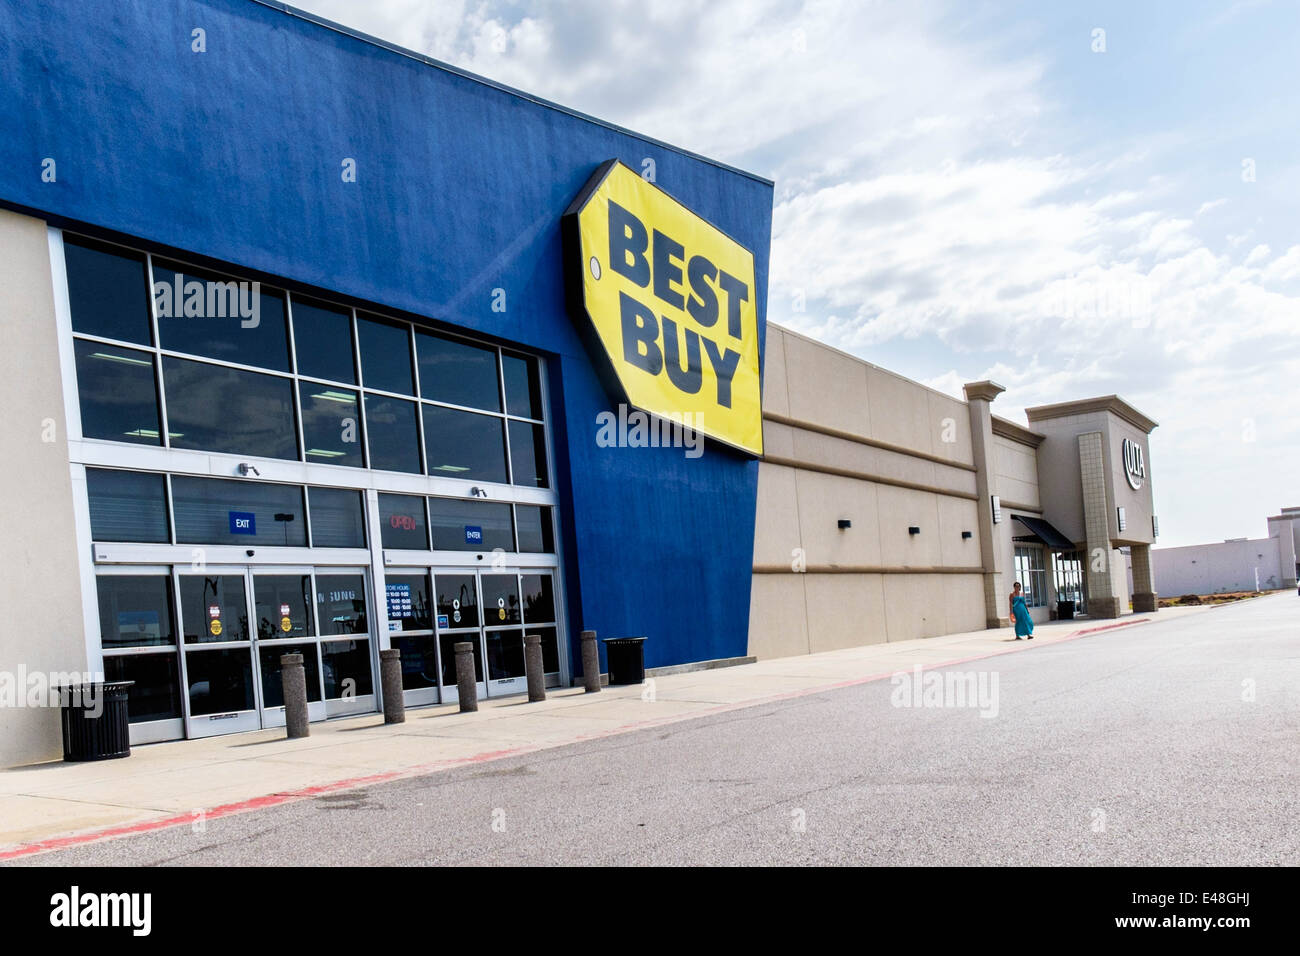 The exterior of Best Buy, a chain electronics store in Oklahoma City, Oklahoma, USA. Stock Photo